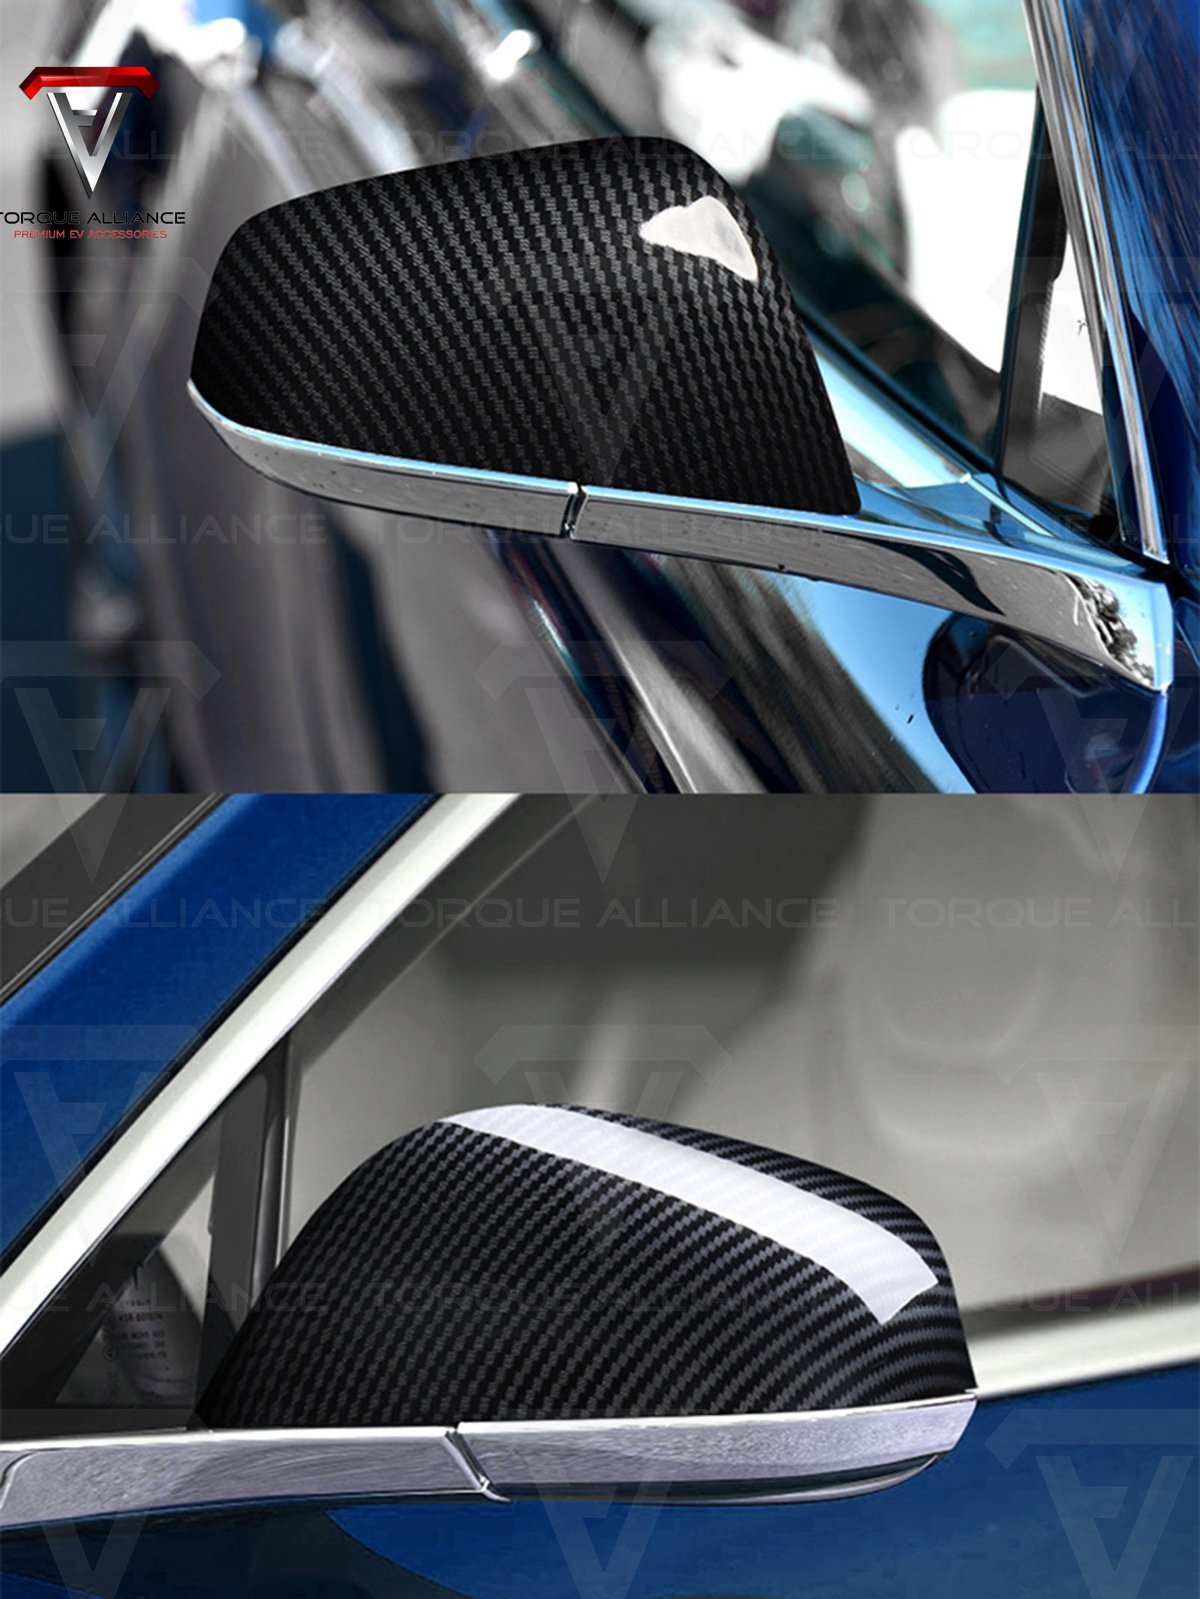 Model S/X: ABS Rearview Mirror Covers (2 pieces, Carbon-look) - Torque Alliance